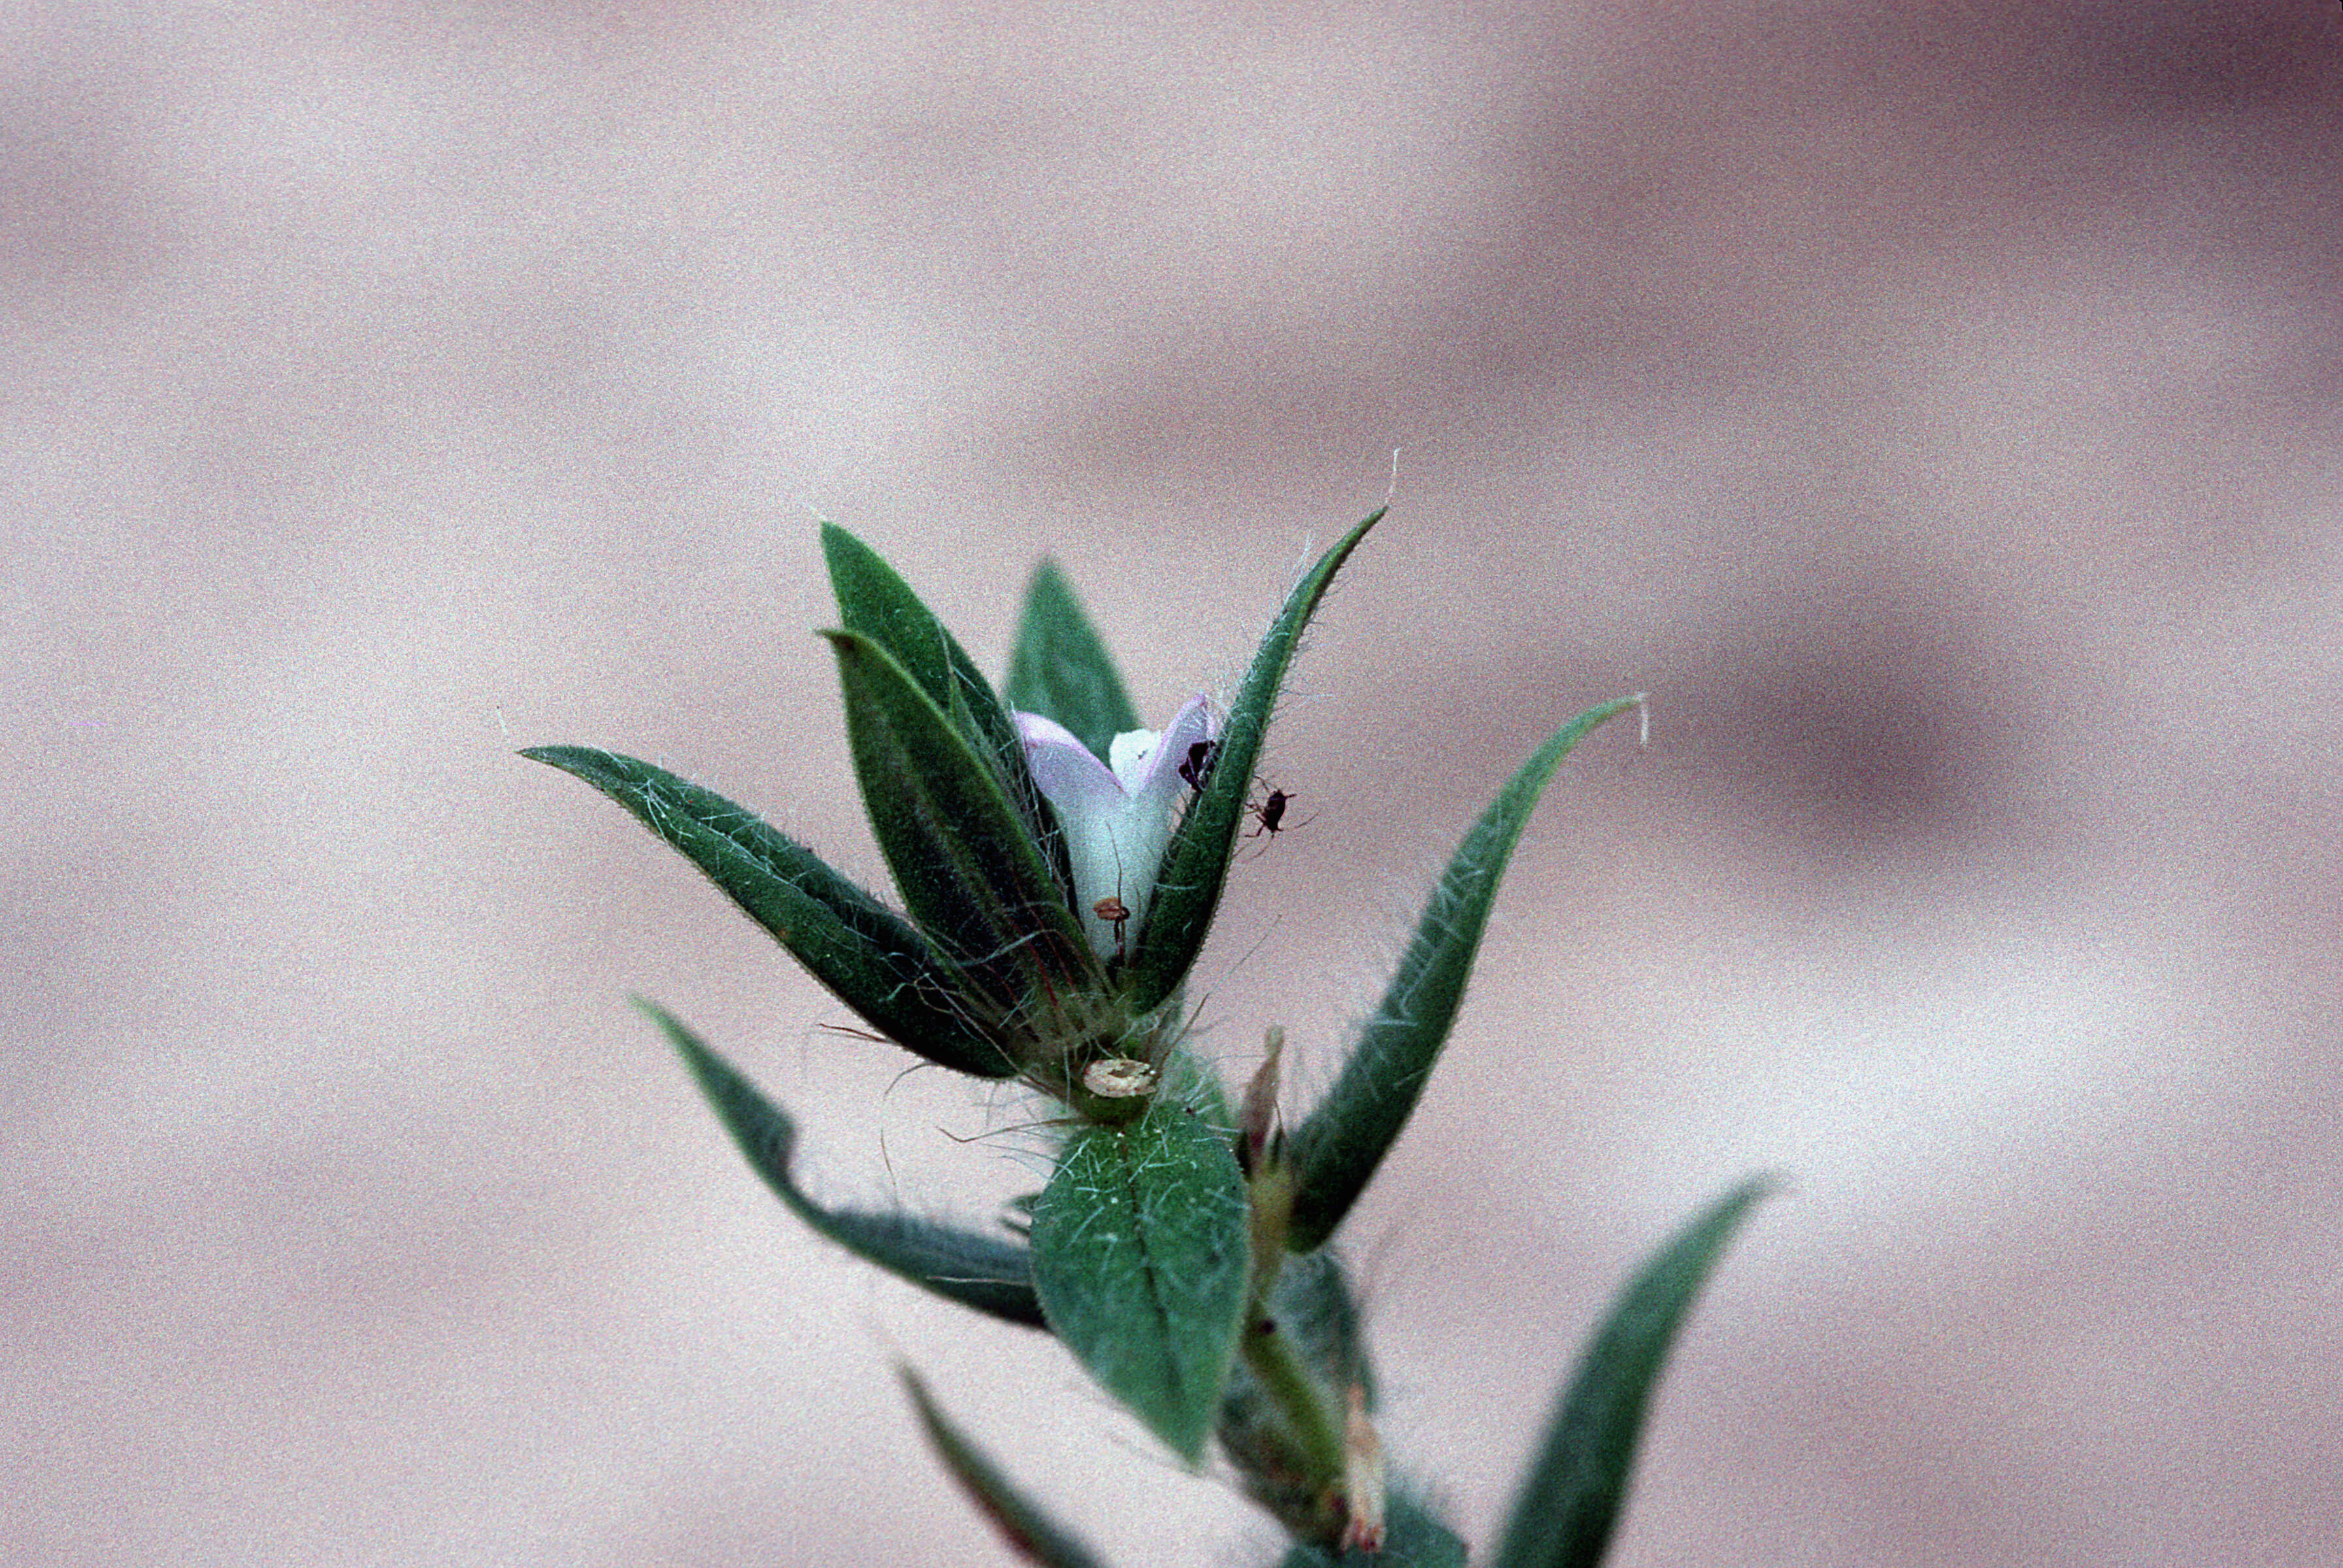 Image of stiff buttonweed